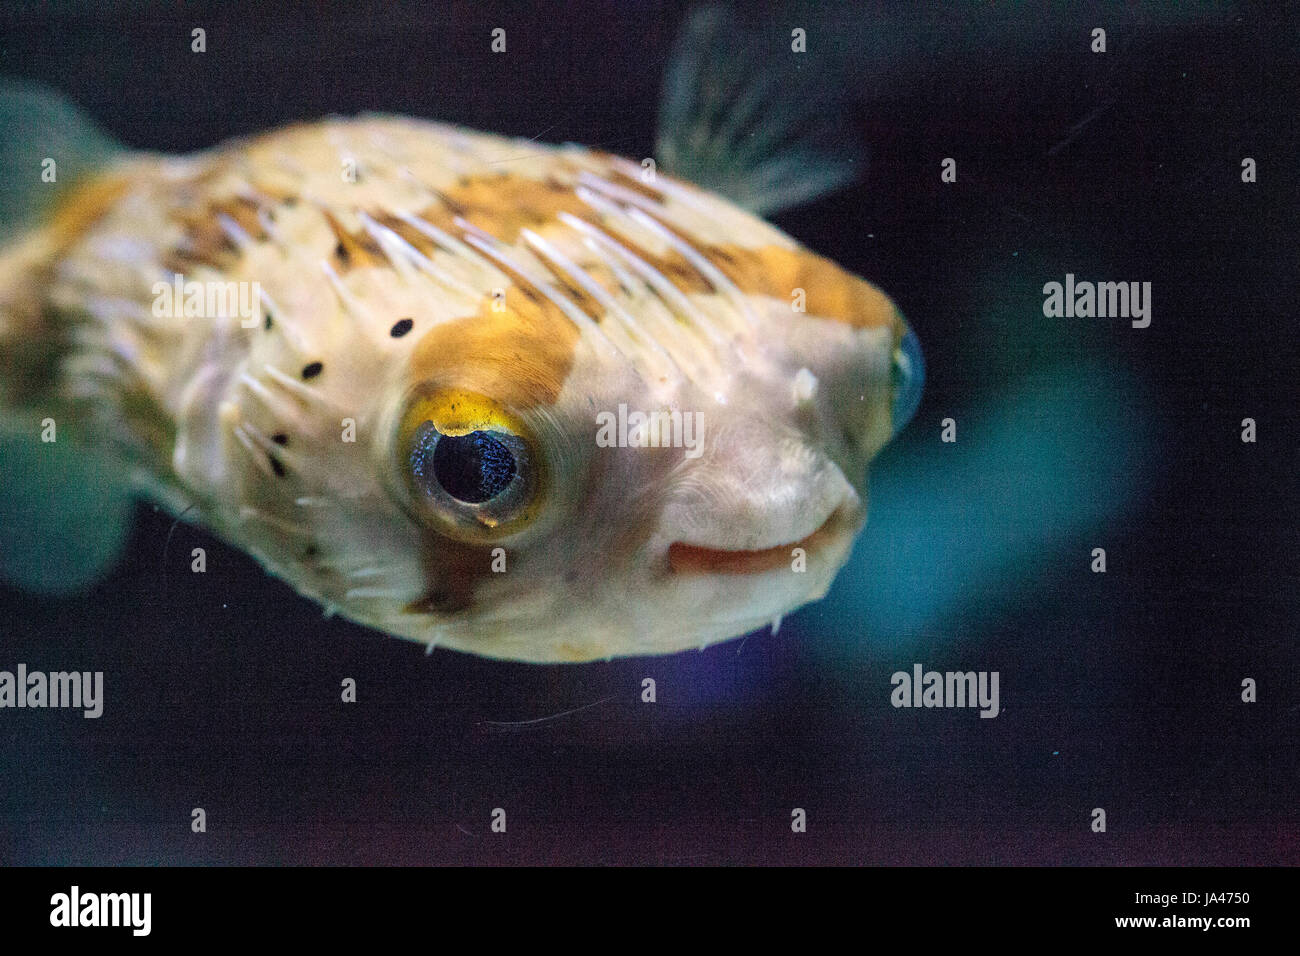 Spiny porcupinefish Diodon holocanthus has eyes that sparkle with blue flecks and skin with spines. This fish can be found in the Red Sea. Stock Photo